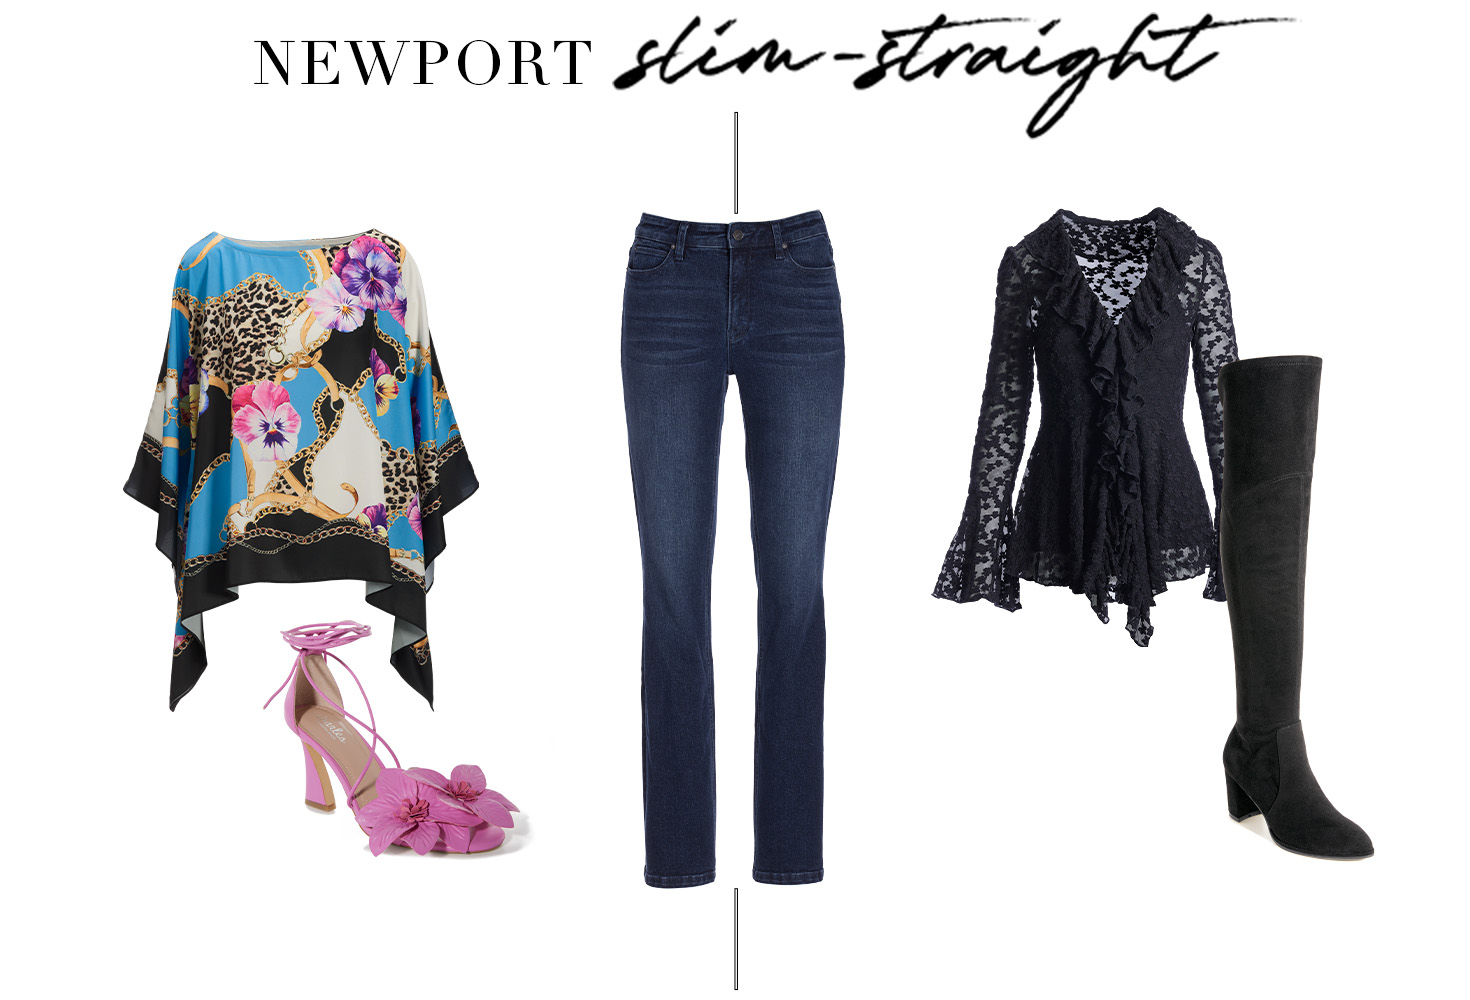 Items from left to right: mutlicolor printed poncho, pink floral embellished lace-up heels, dark wash straight-leg jeans, black long-sleeve lace top, and black over-the-knee boots.